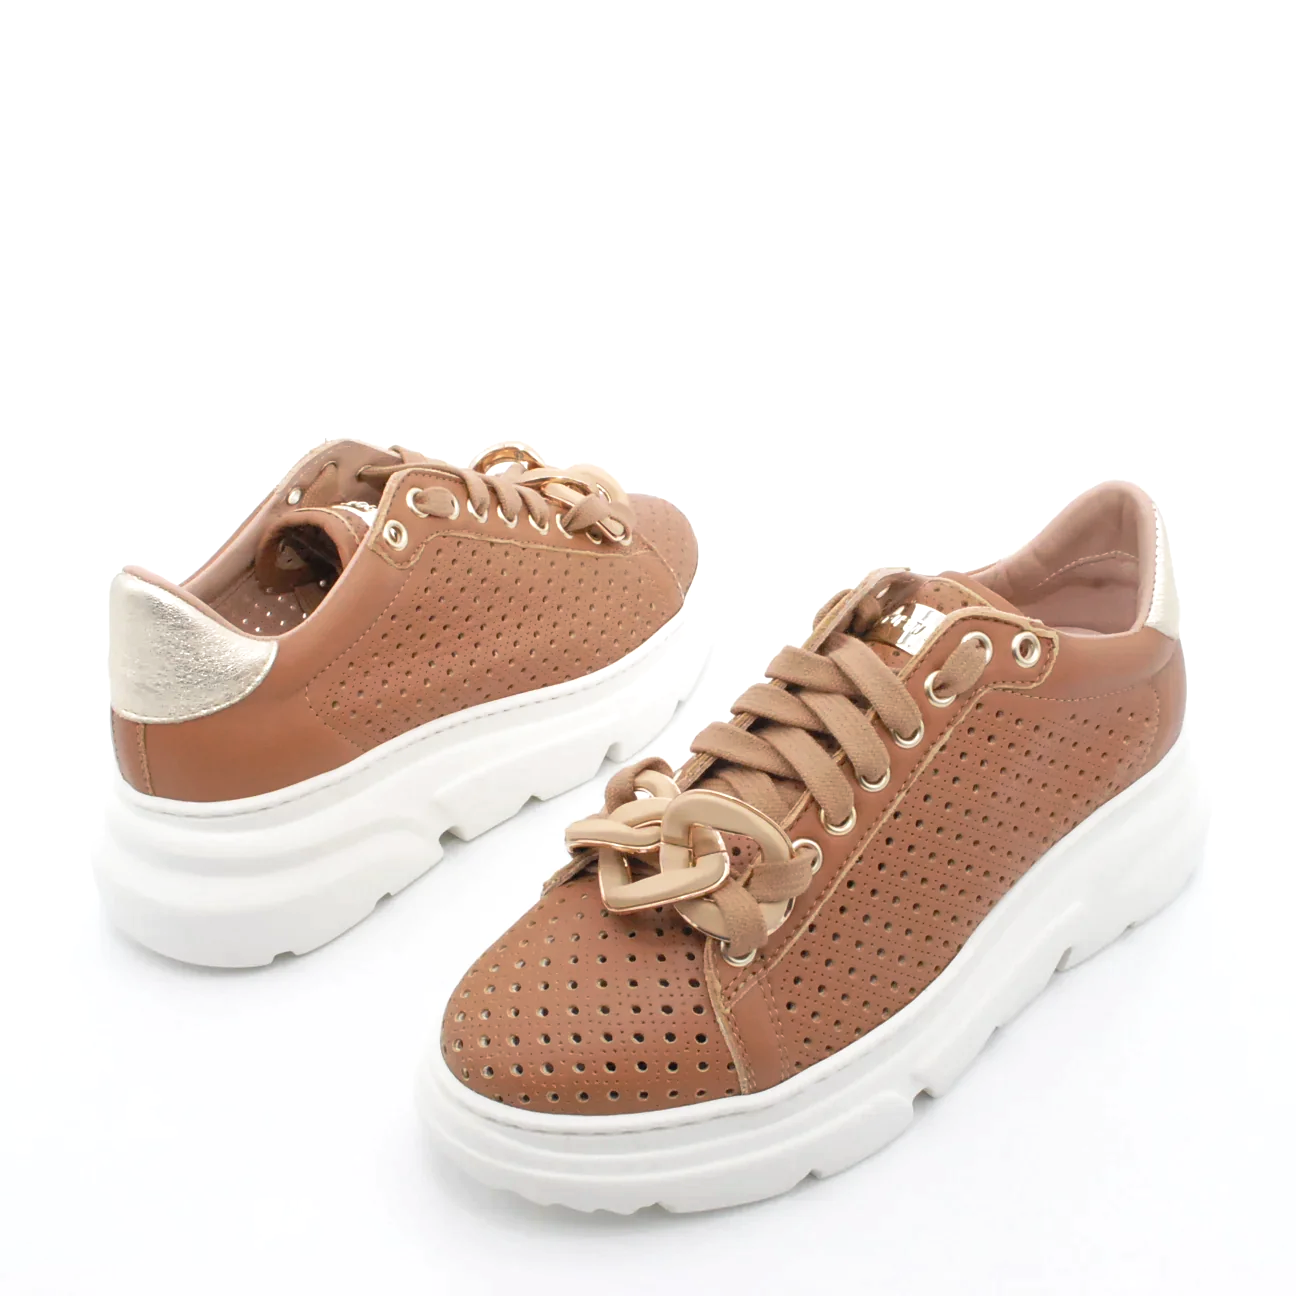 sneakers-stokton-in-pelle-forata-sneakers-2_9d6948f9-e2ba-47eb-9168-5972f4f8d9a0.png